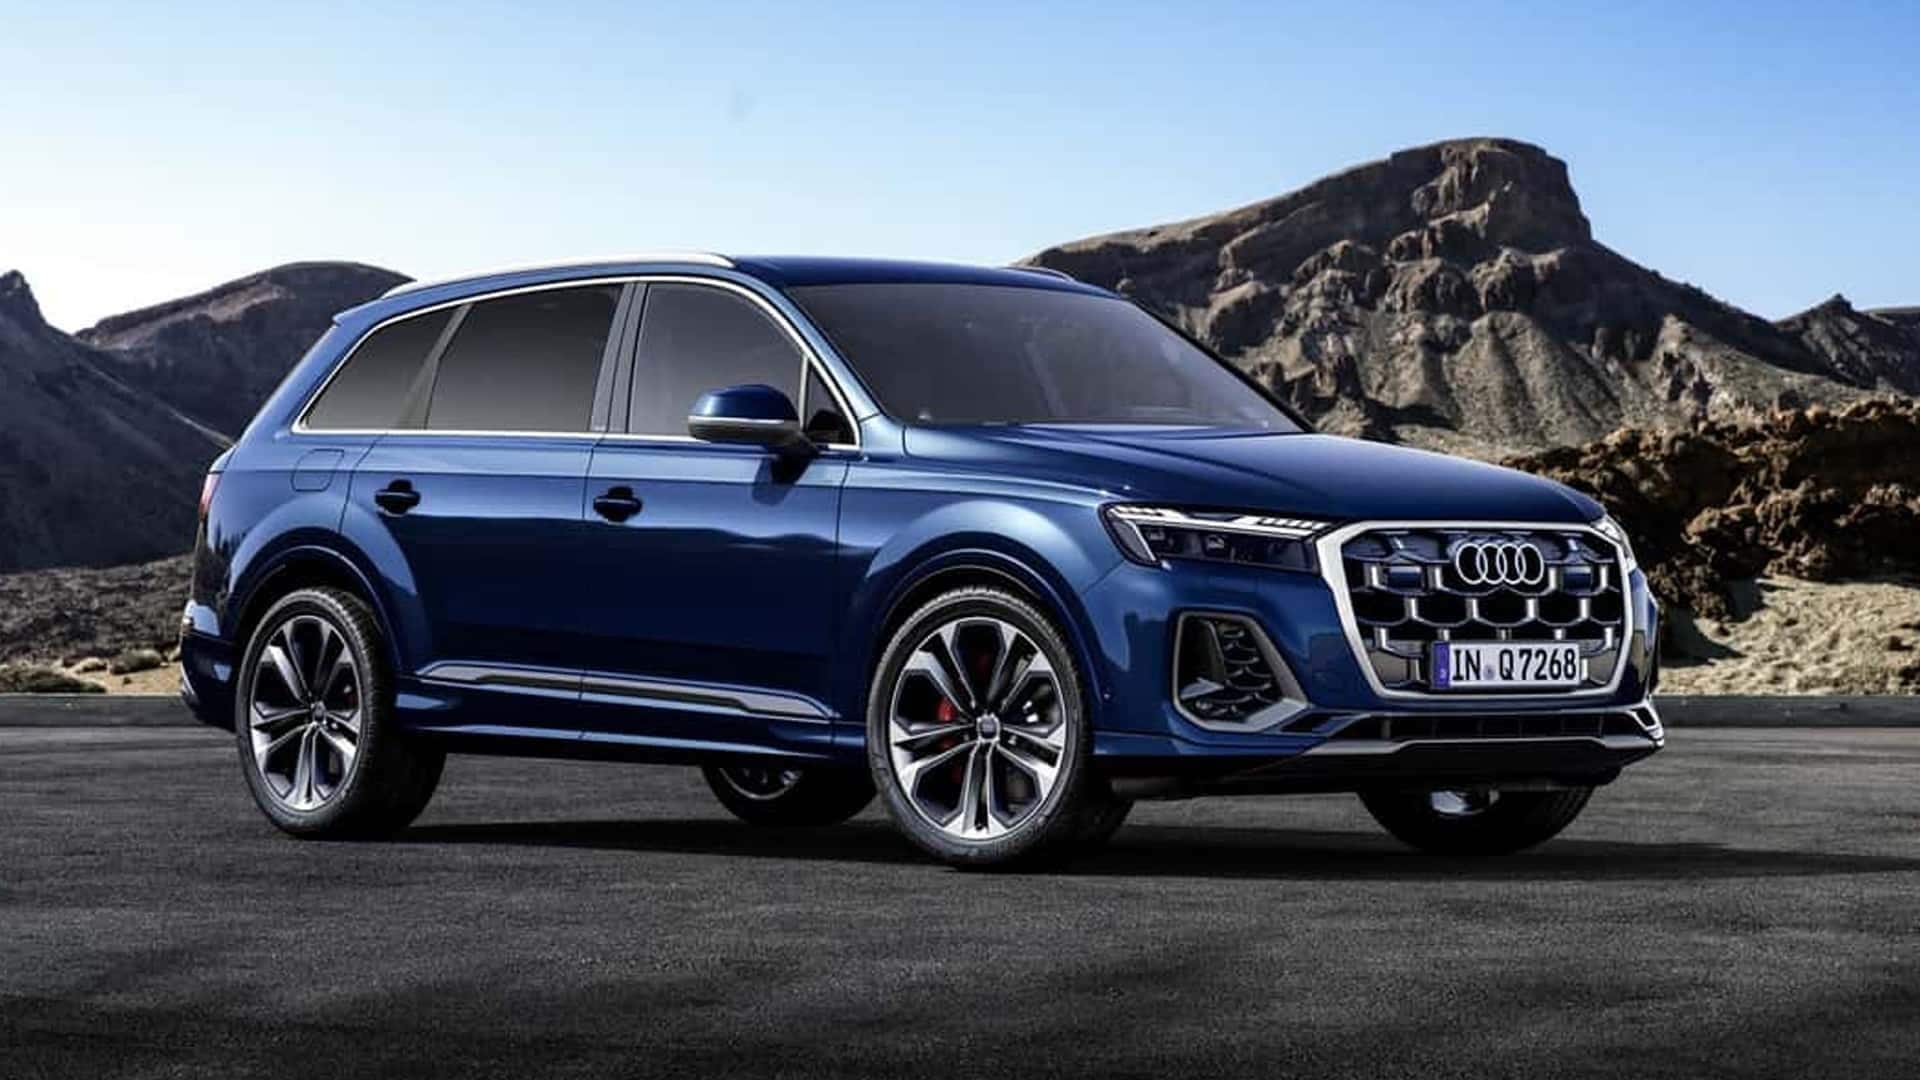 2025 Audi Q7 unveiled with new design and laser headlights